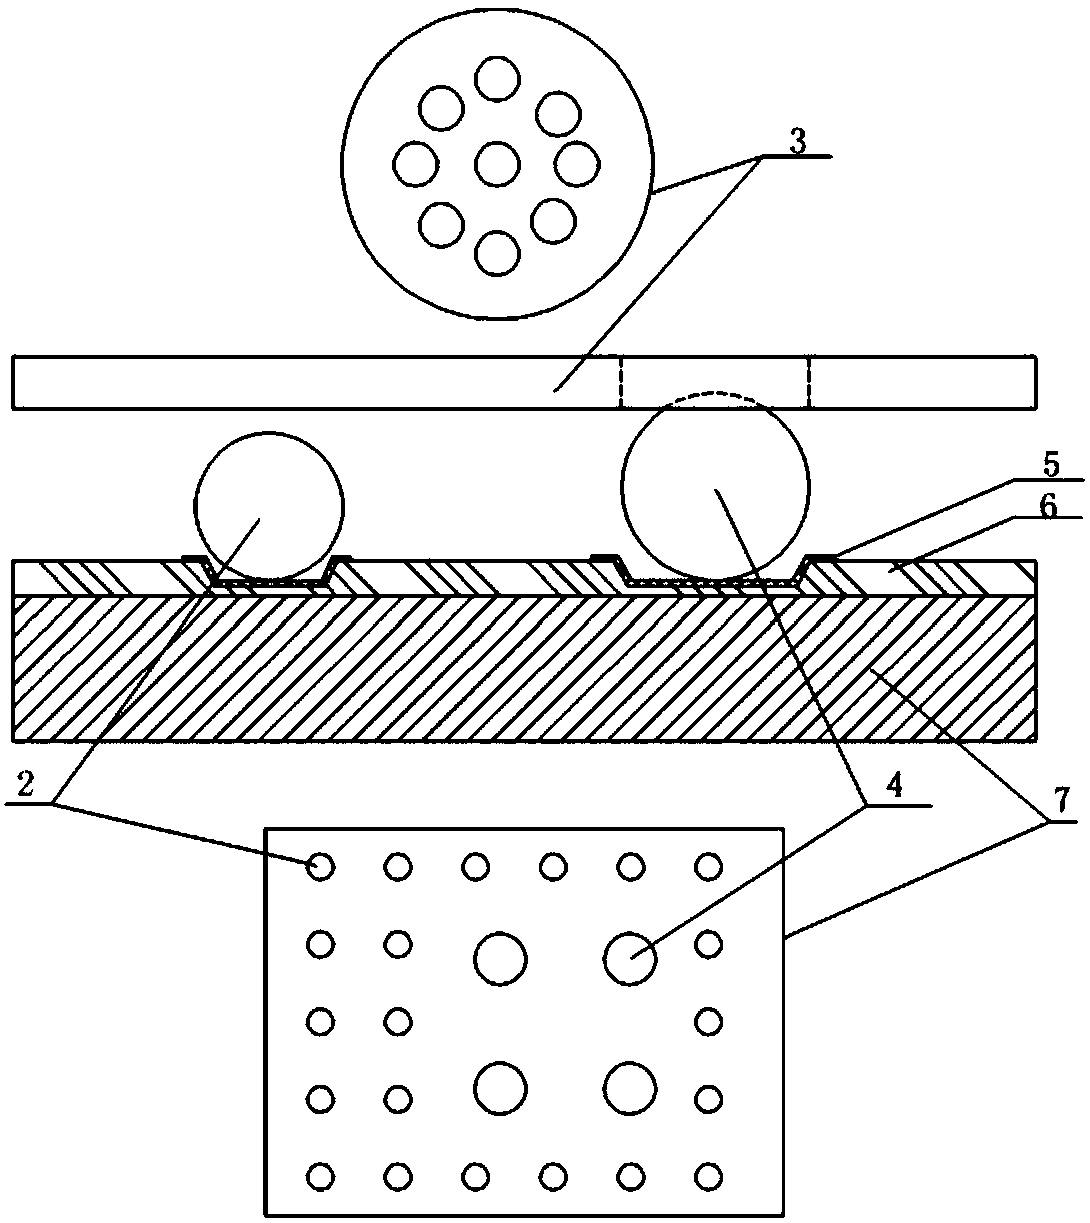 Method for preparing wafers having bumps with different diameters